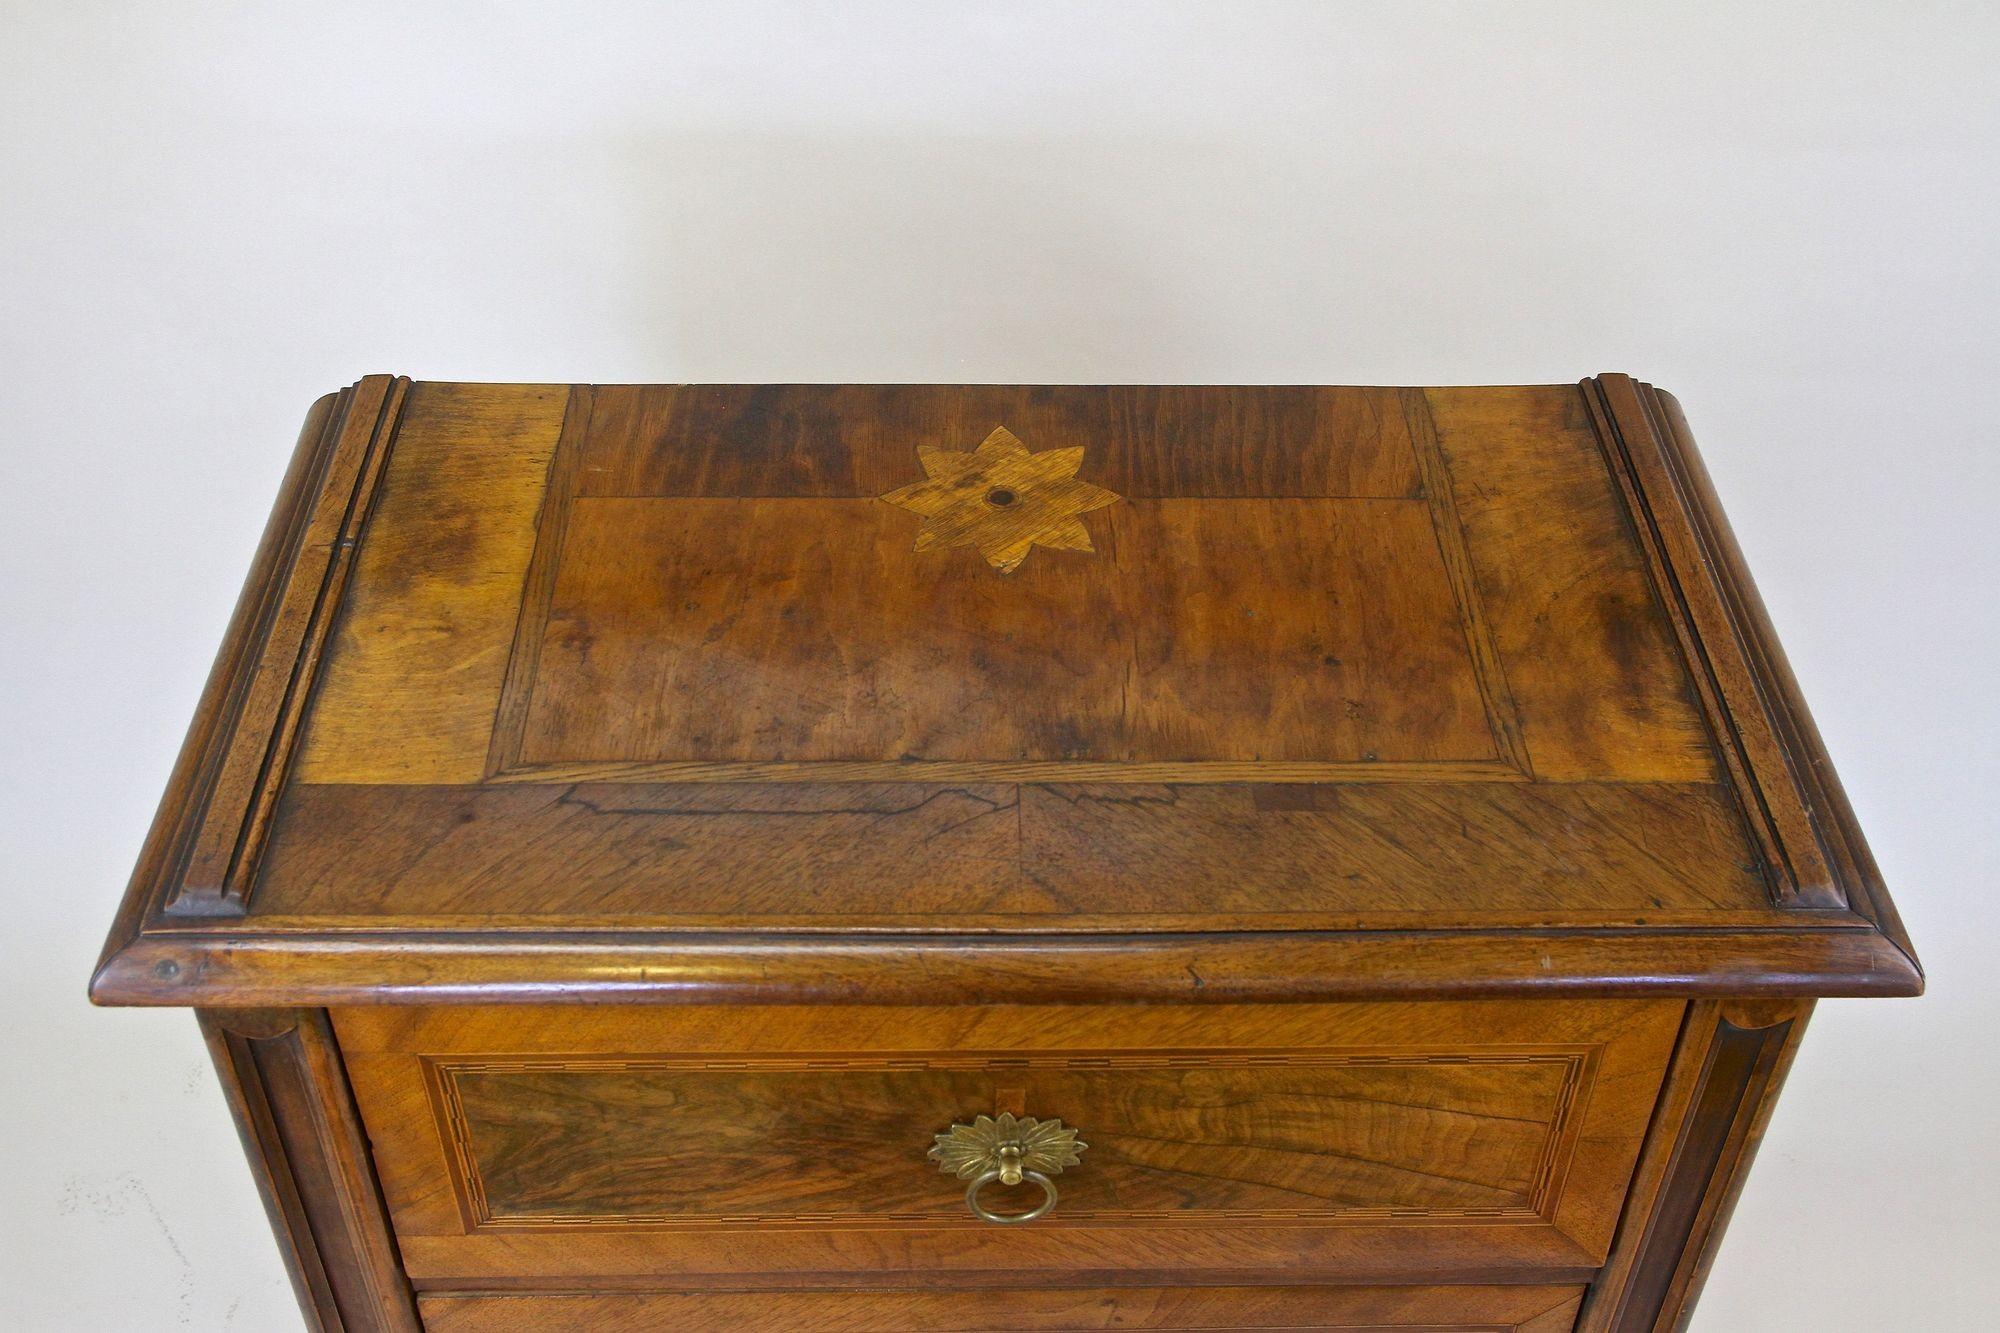 Austrian 19th Century Biedermeier Nutwood Chest Of Drawers With Micro-Inlays, AT ca. 1850 For Sale